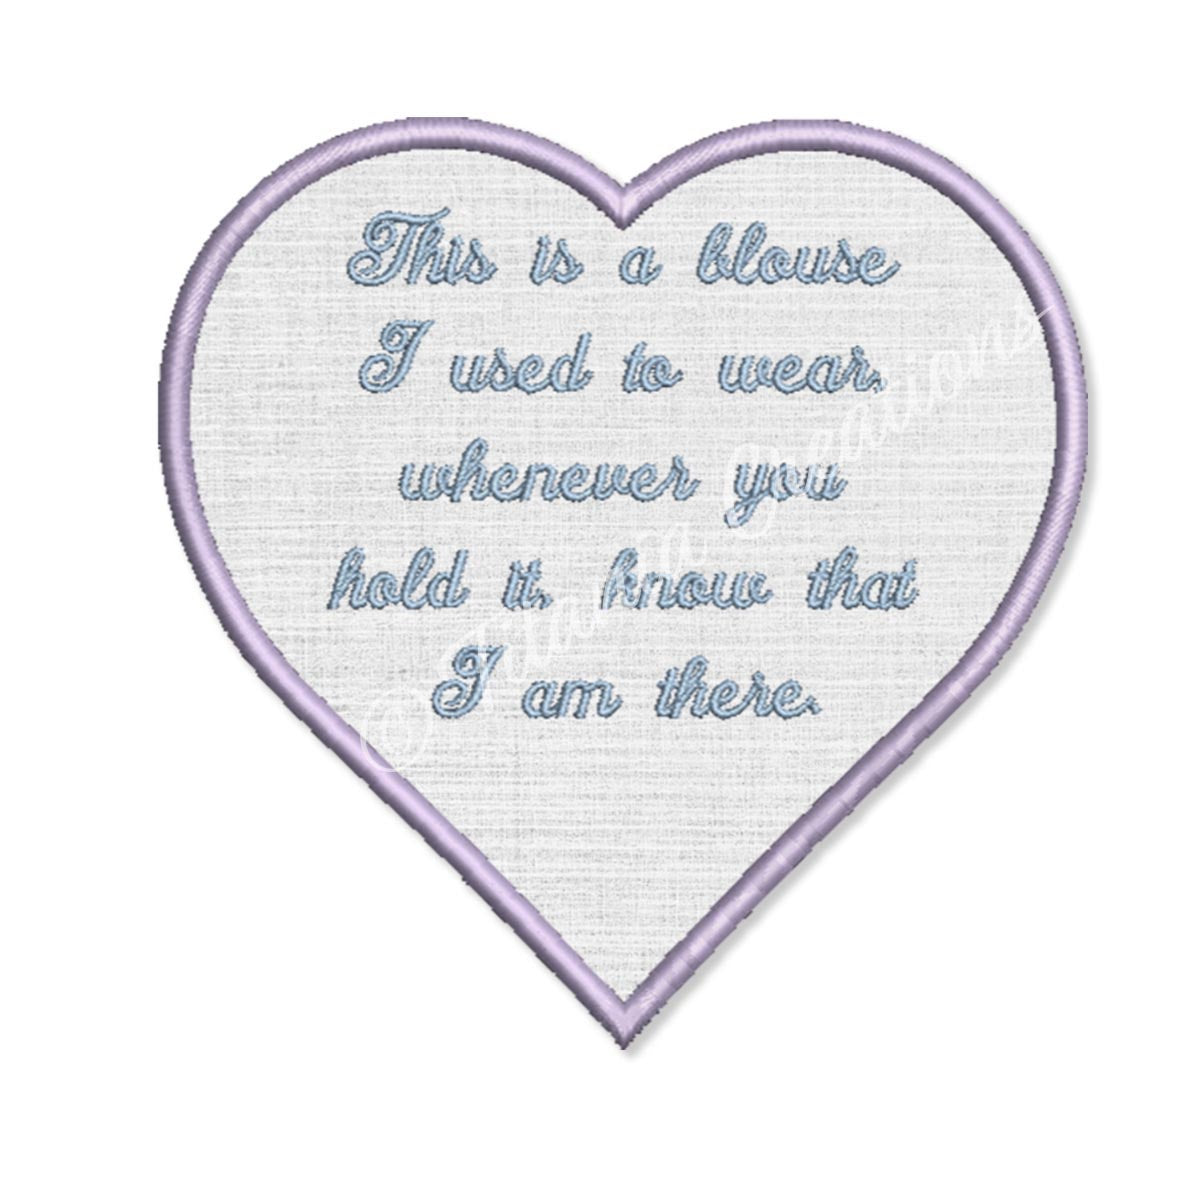 This Is A Blouse Heart Patch 5x5